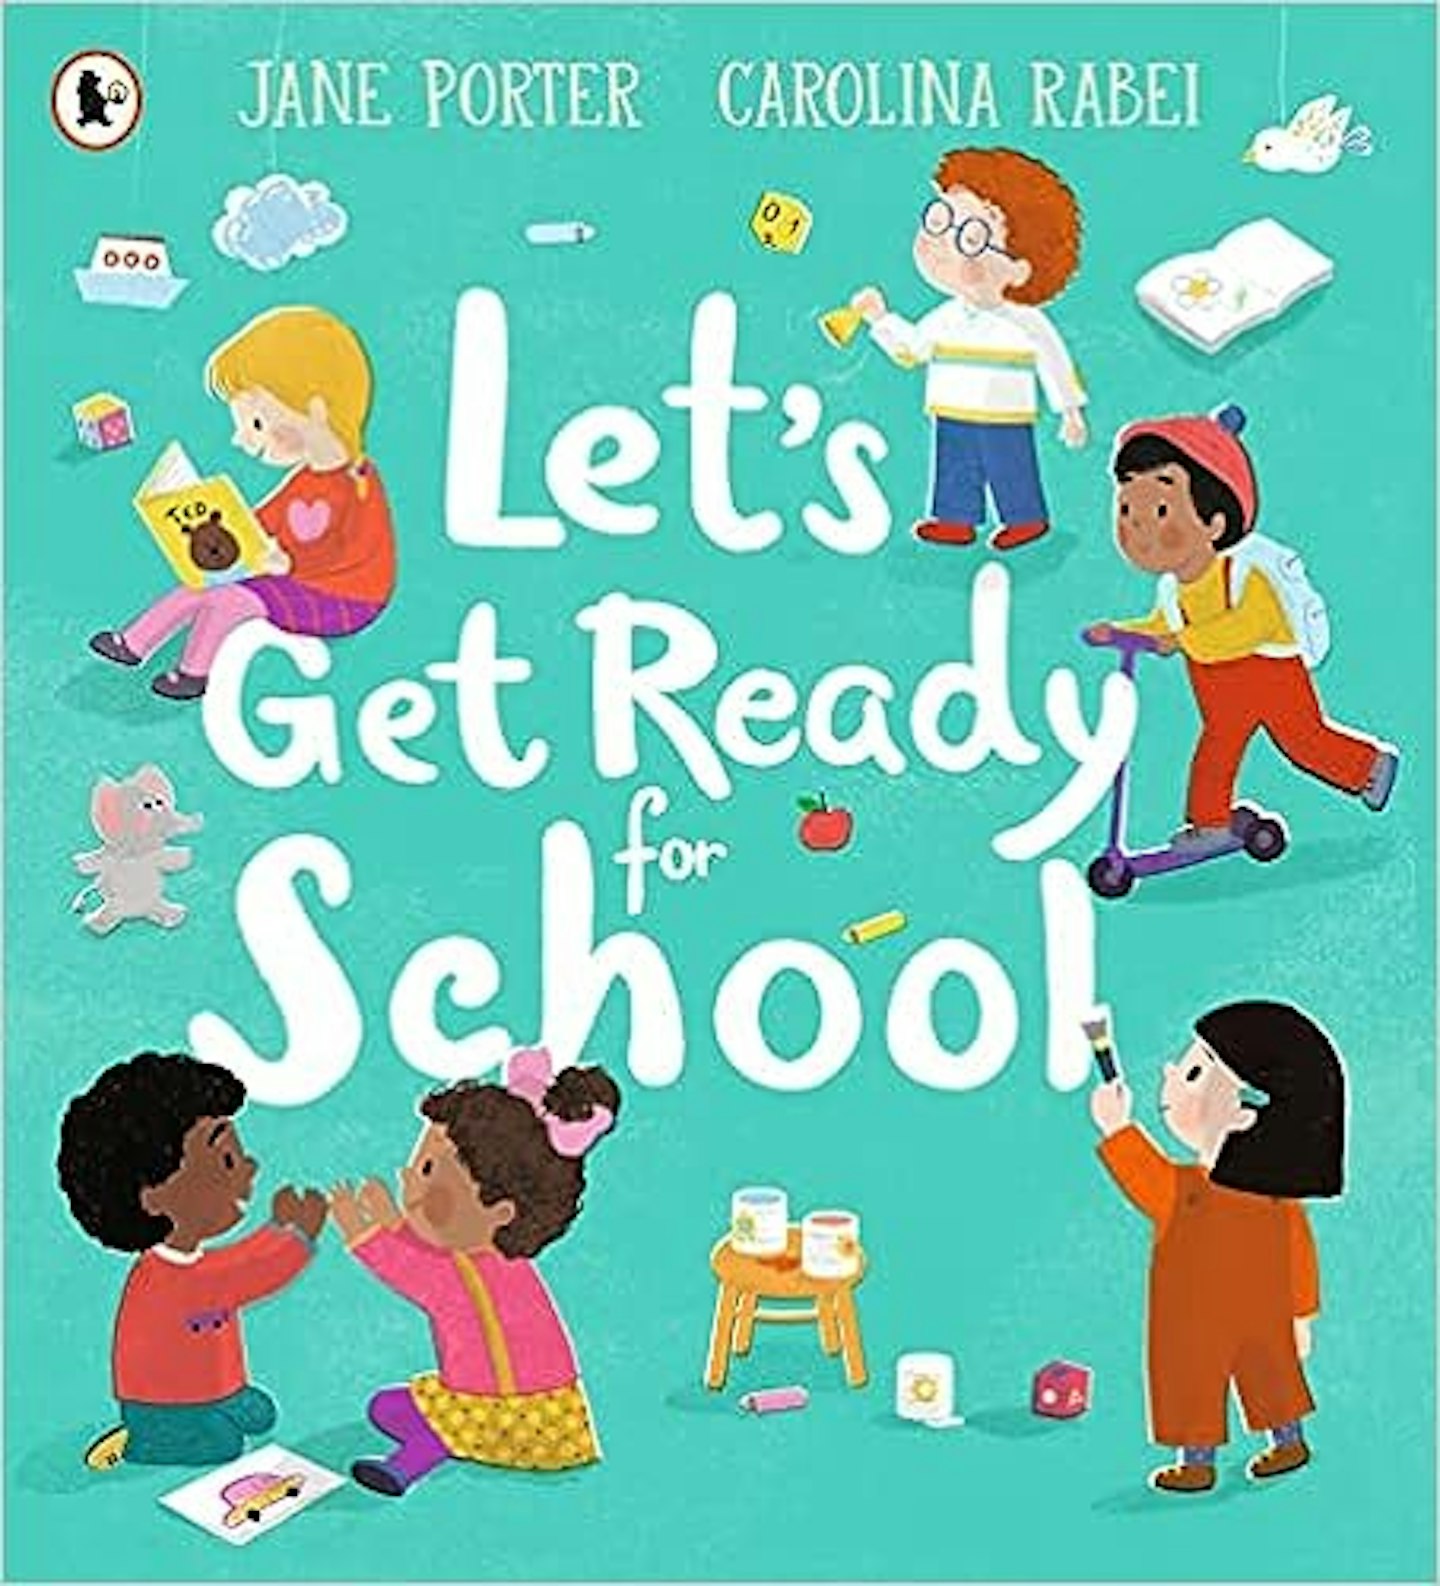 Let’s Get Ready For School by Jane Porter and Carolina Rabei